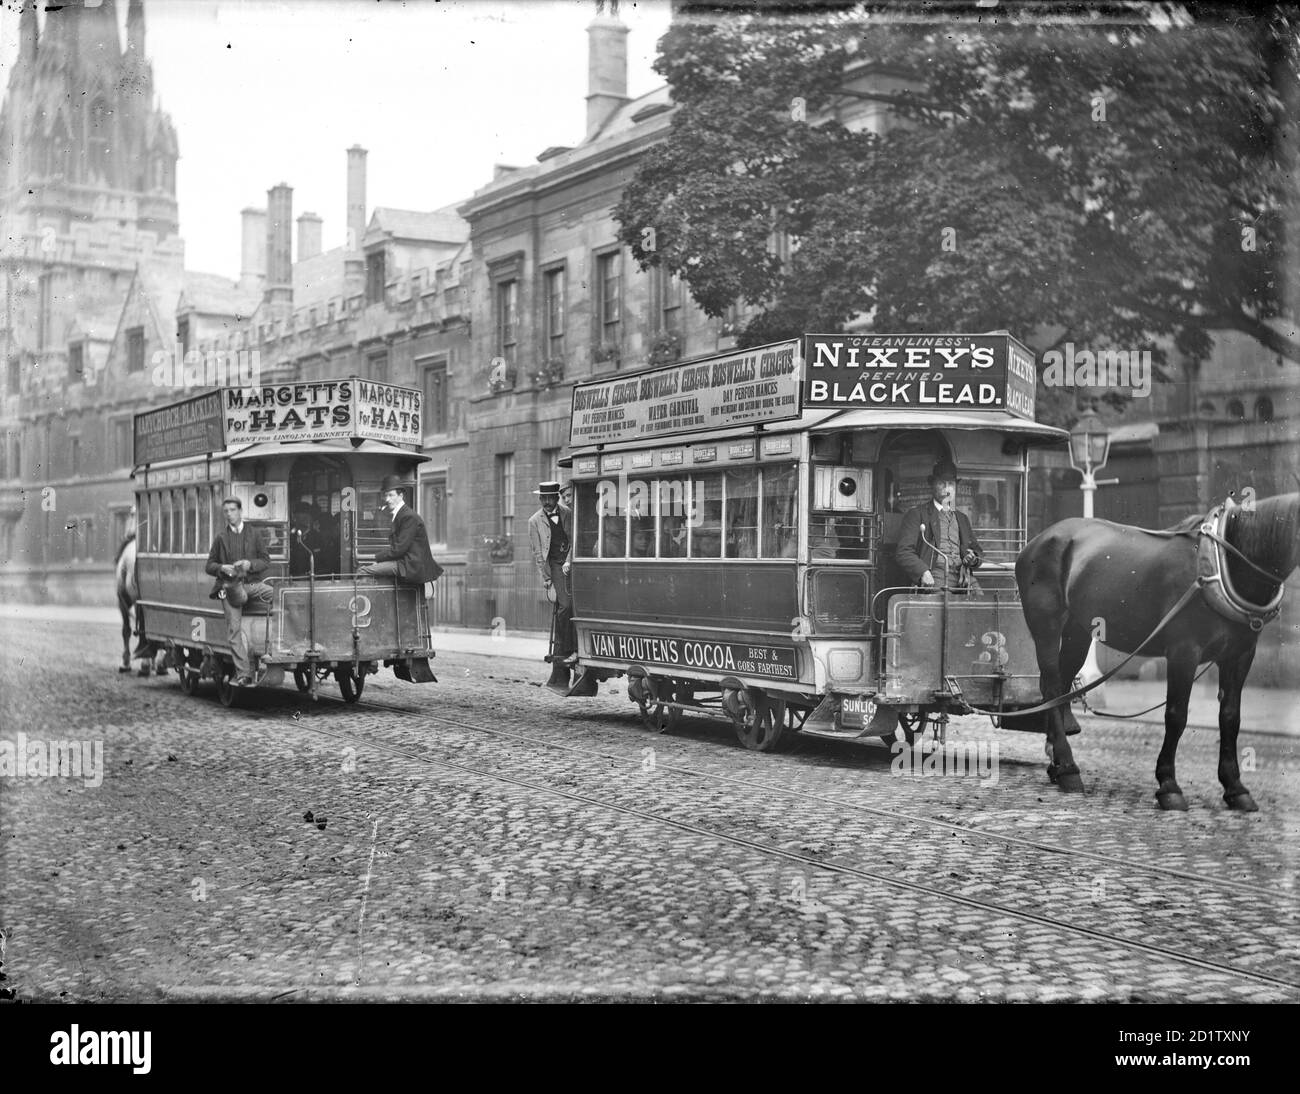 High Street, Oxford, Oxfordshire. Two horse-drawn trams passing in the street with advertising panels attached to the roofs. Magdalen Bridge was widened in 1899 by the Oxford Local Board to accommodate horse-drawn trams, but by 1913 motor buses had made their appearance. Stock Photo